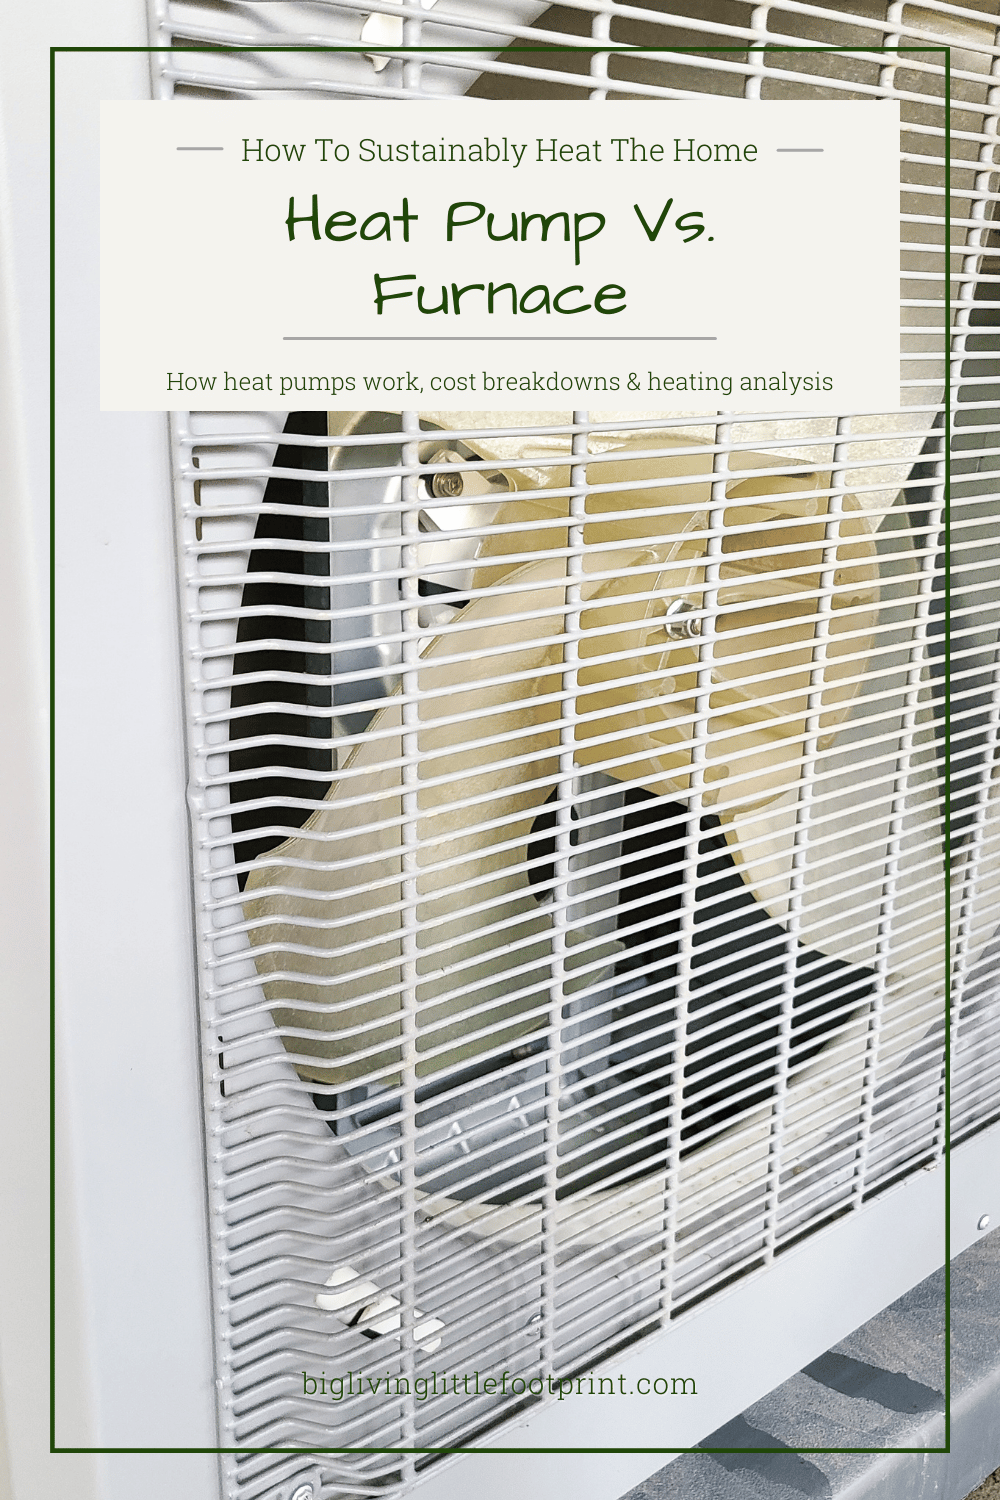 Heat pump vs furnace - image shows heat pump compressor fan with text overlaid saying How To Sustainably Heat Your Home